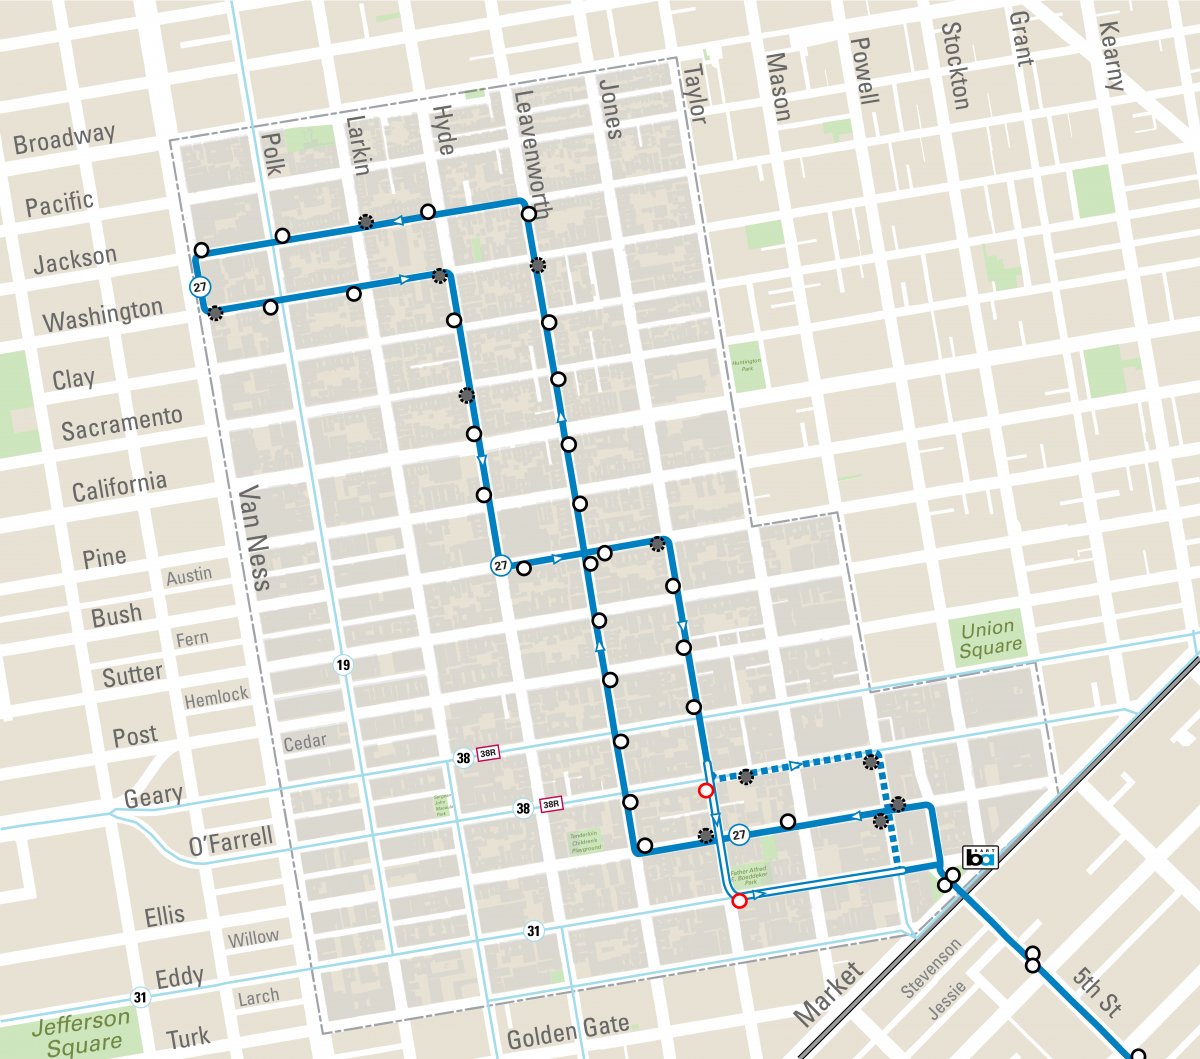 27 Bryant Route north of market street with August 2019 stop removals and reroute